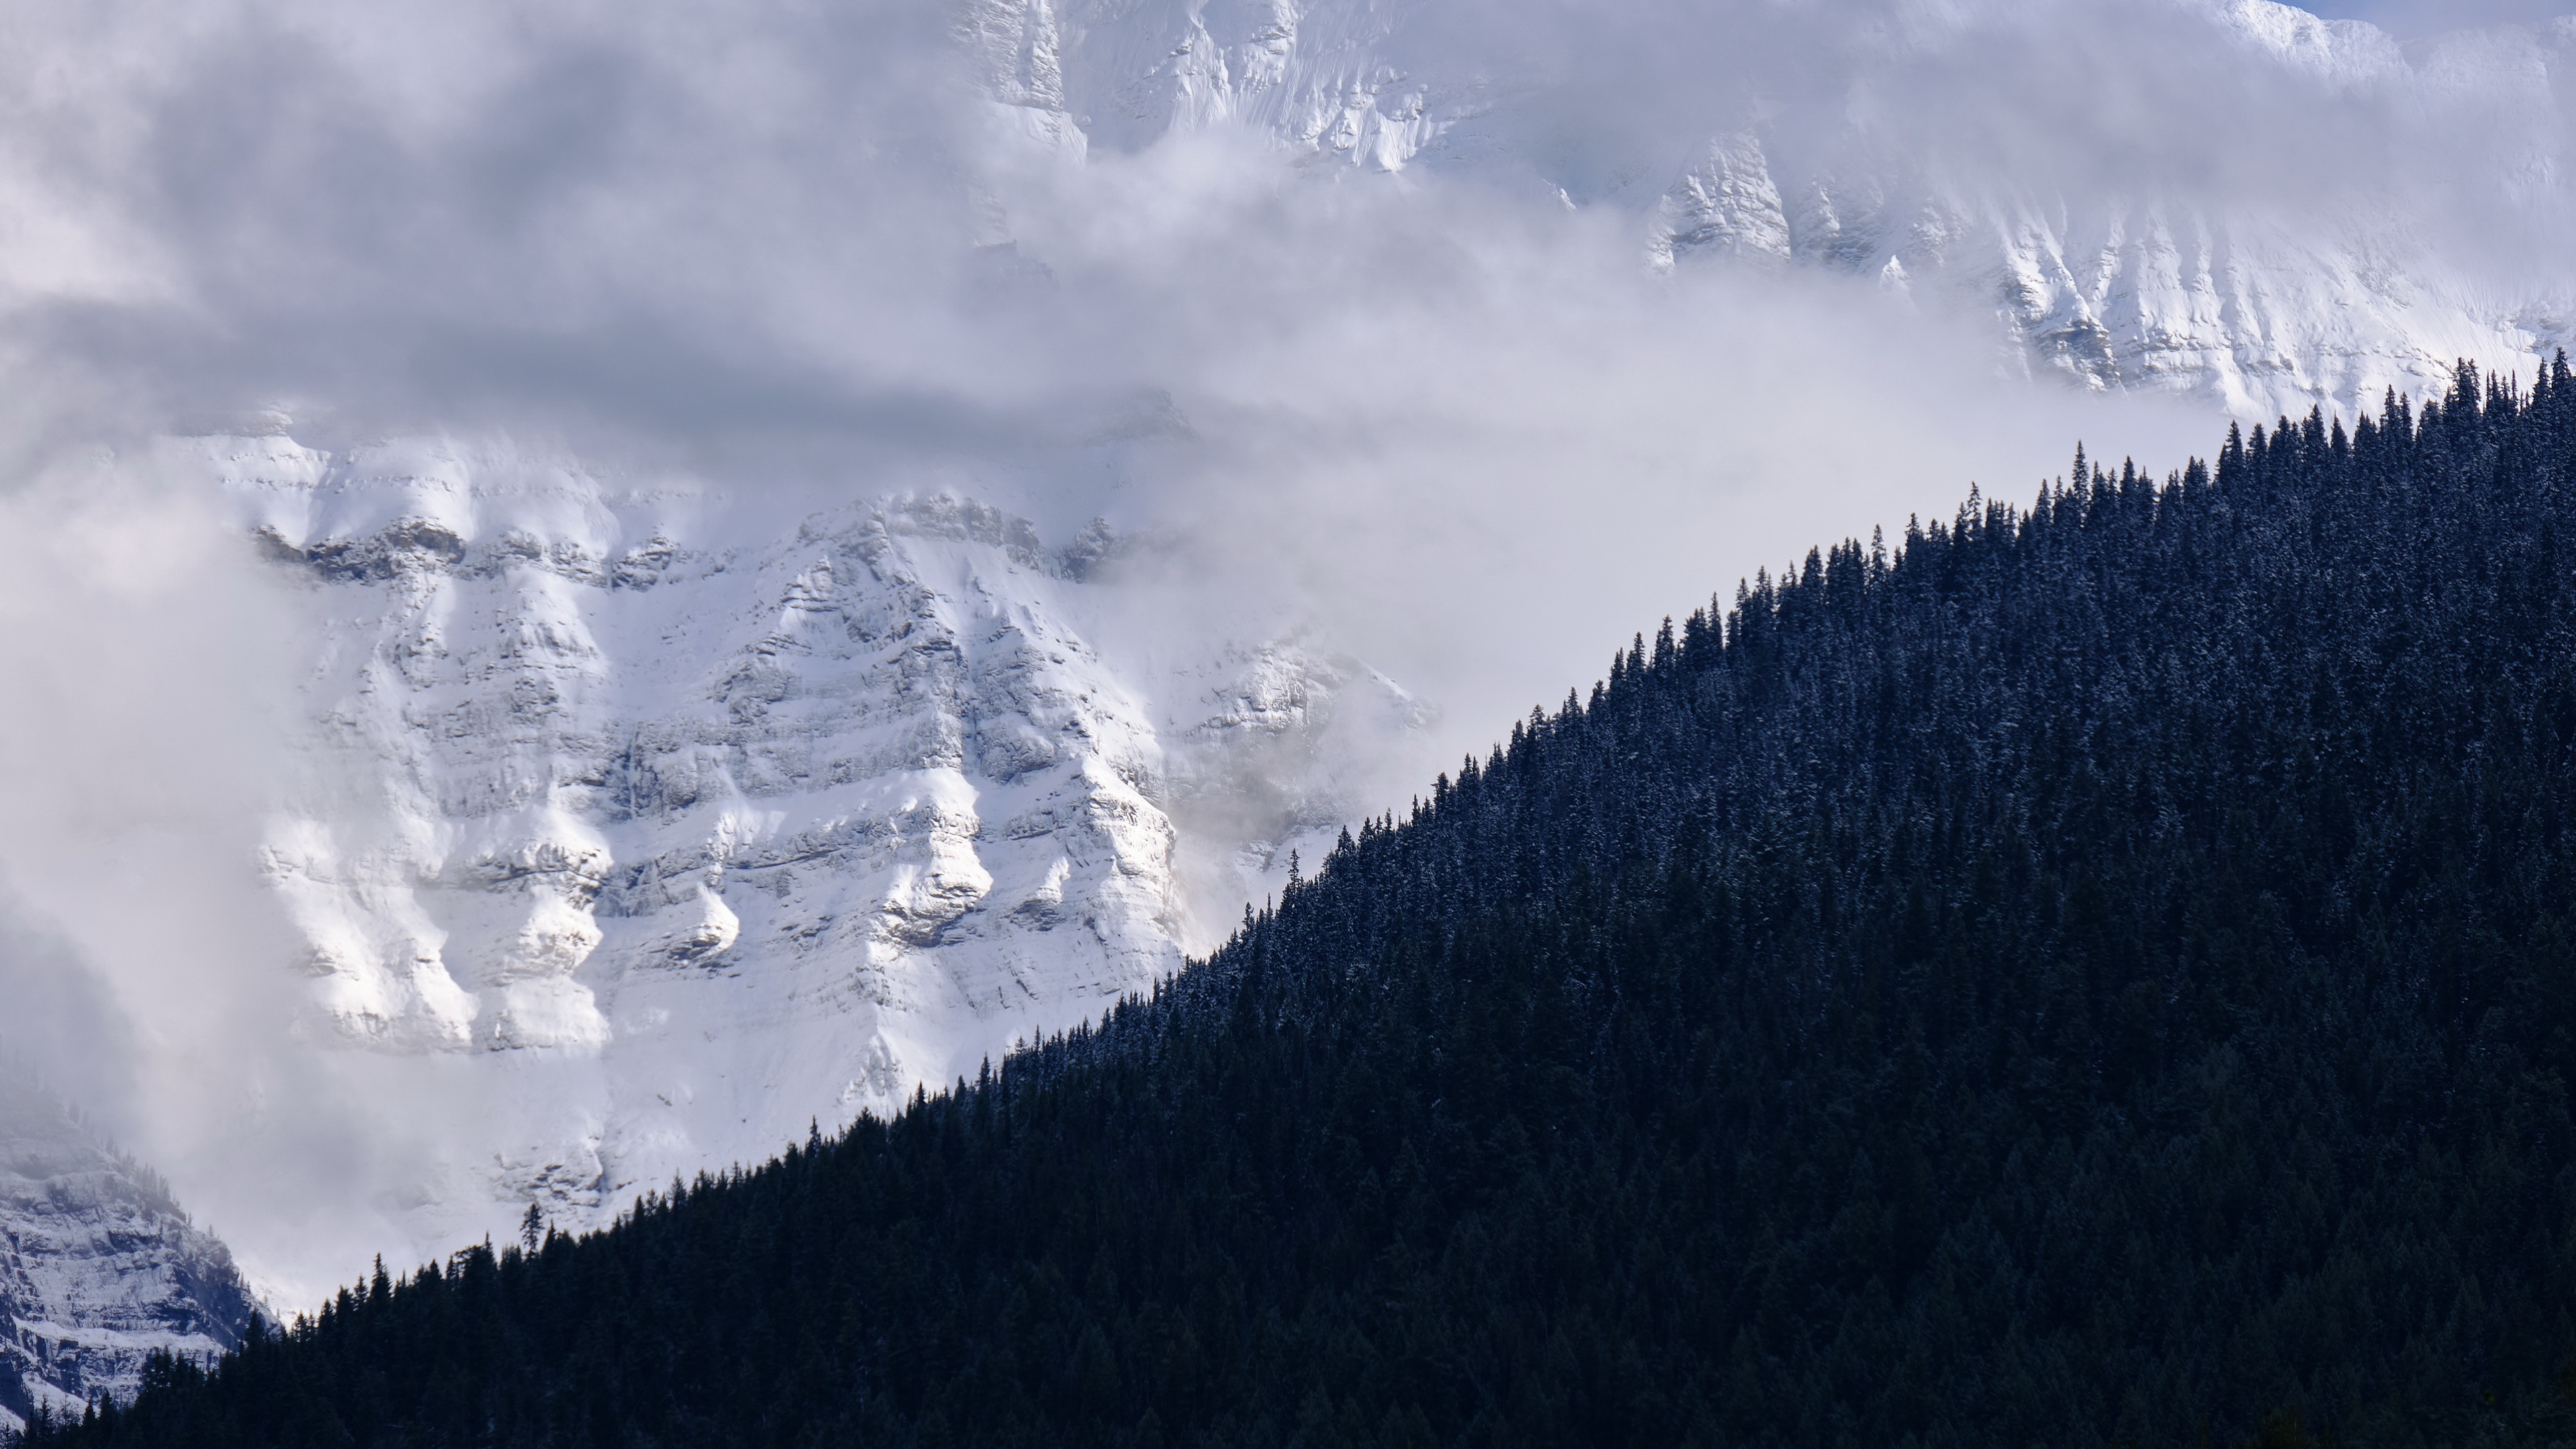 General 3840x2160 nature landscape mountains snow ice snowy peak snowy mountain